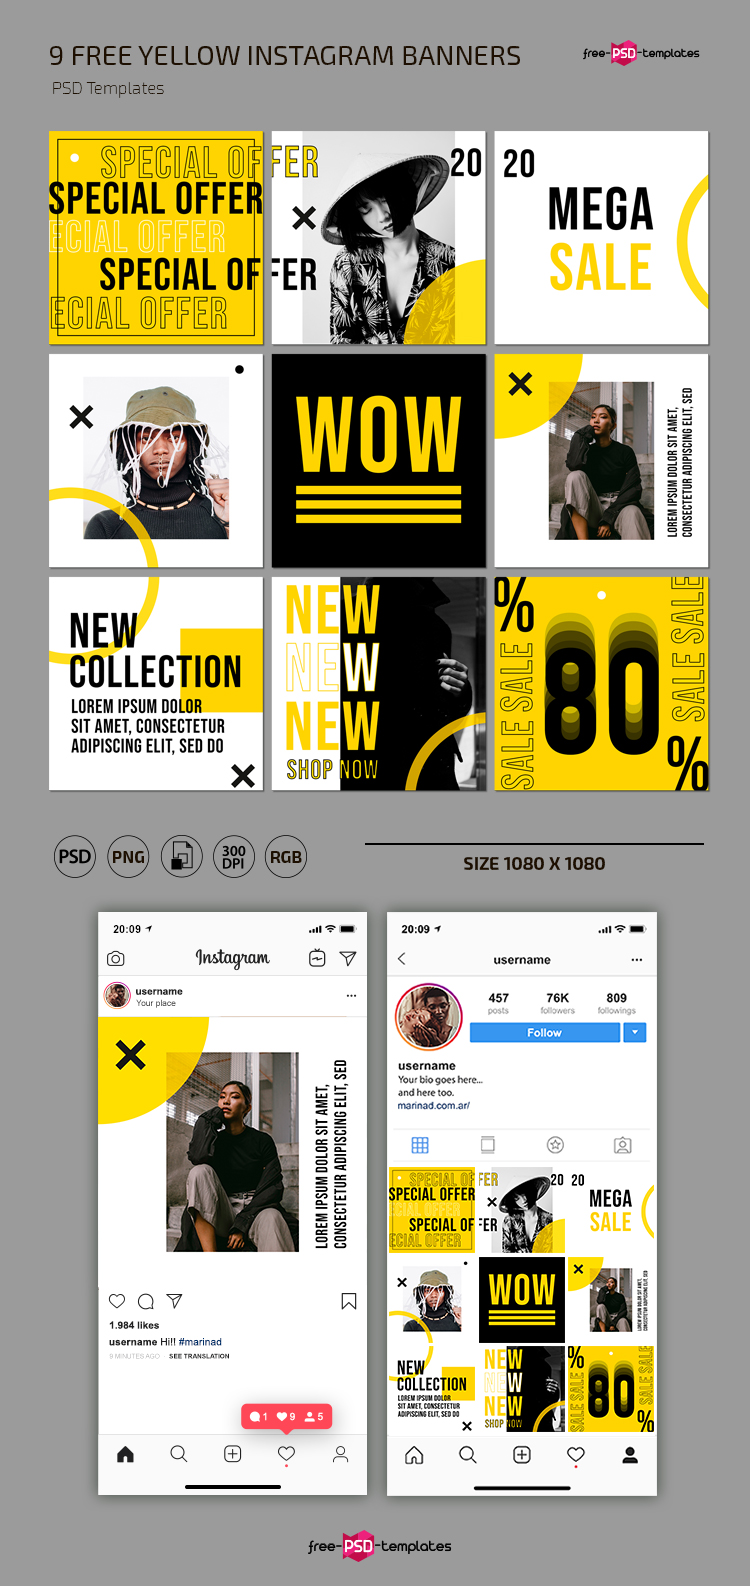 Download Free Yellow Instagram Posts Template In Psd Free Psd Templates PSD Mockup Templates